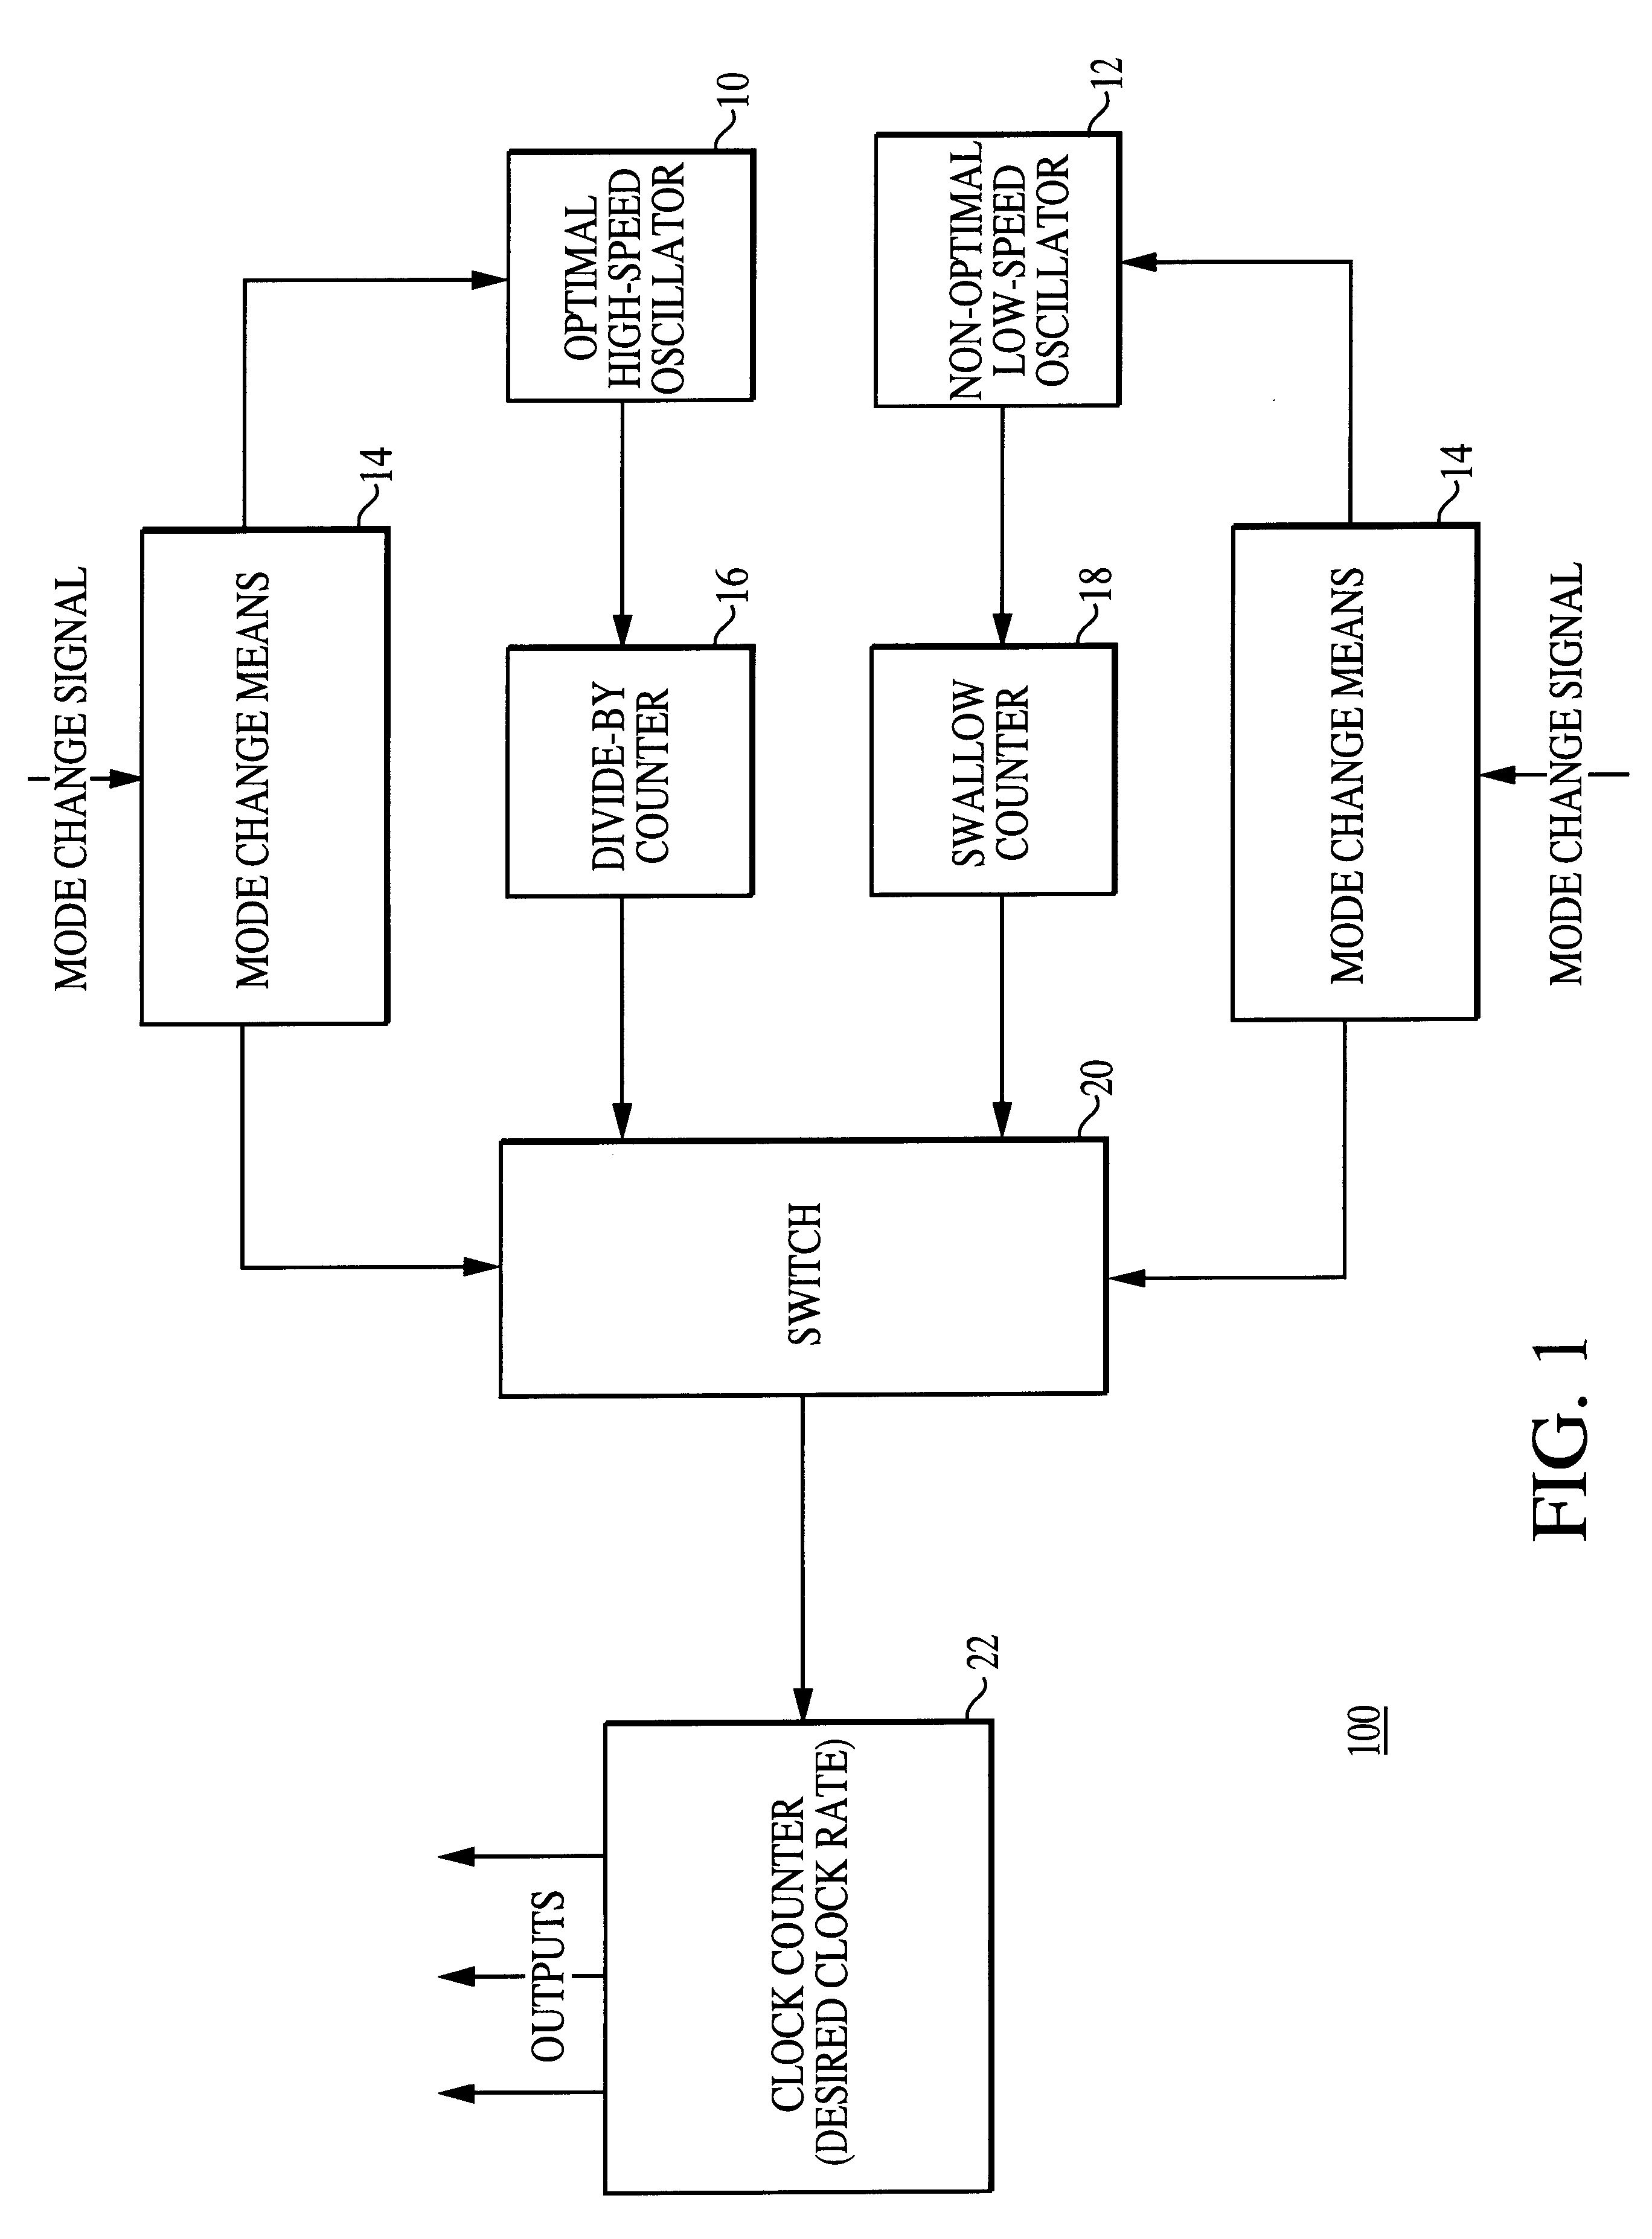 Method and apparatus for implementing a high-precision interval timer utilizing multiple oscillators including a non-optimal oscillator